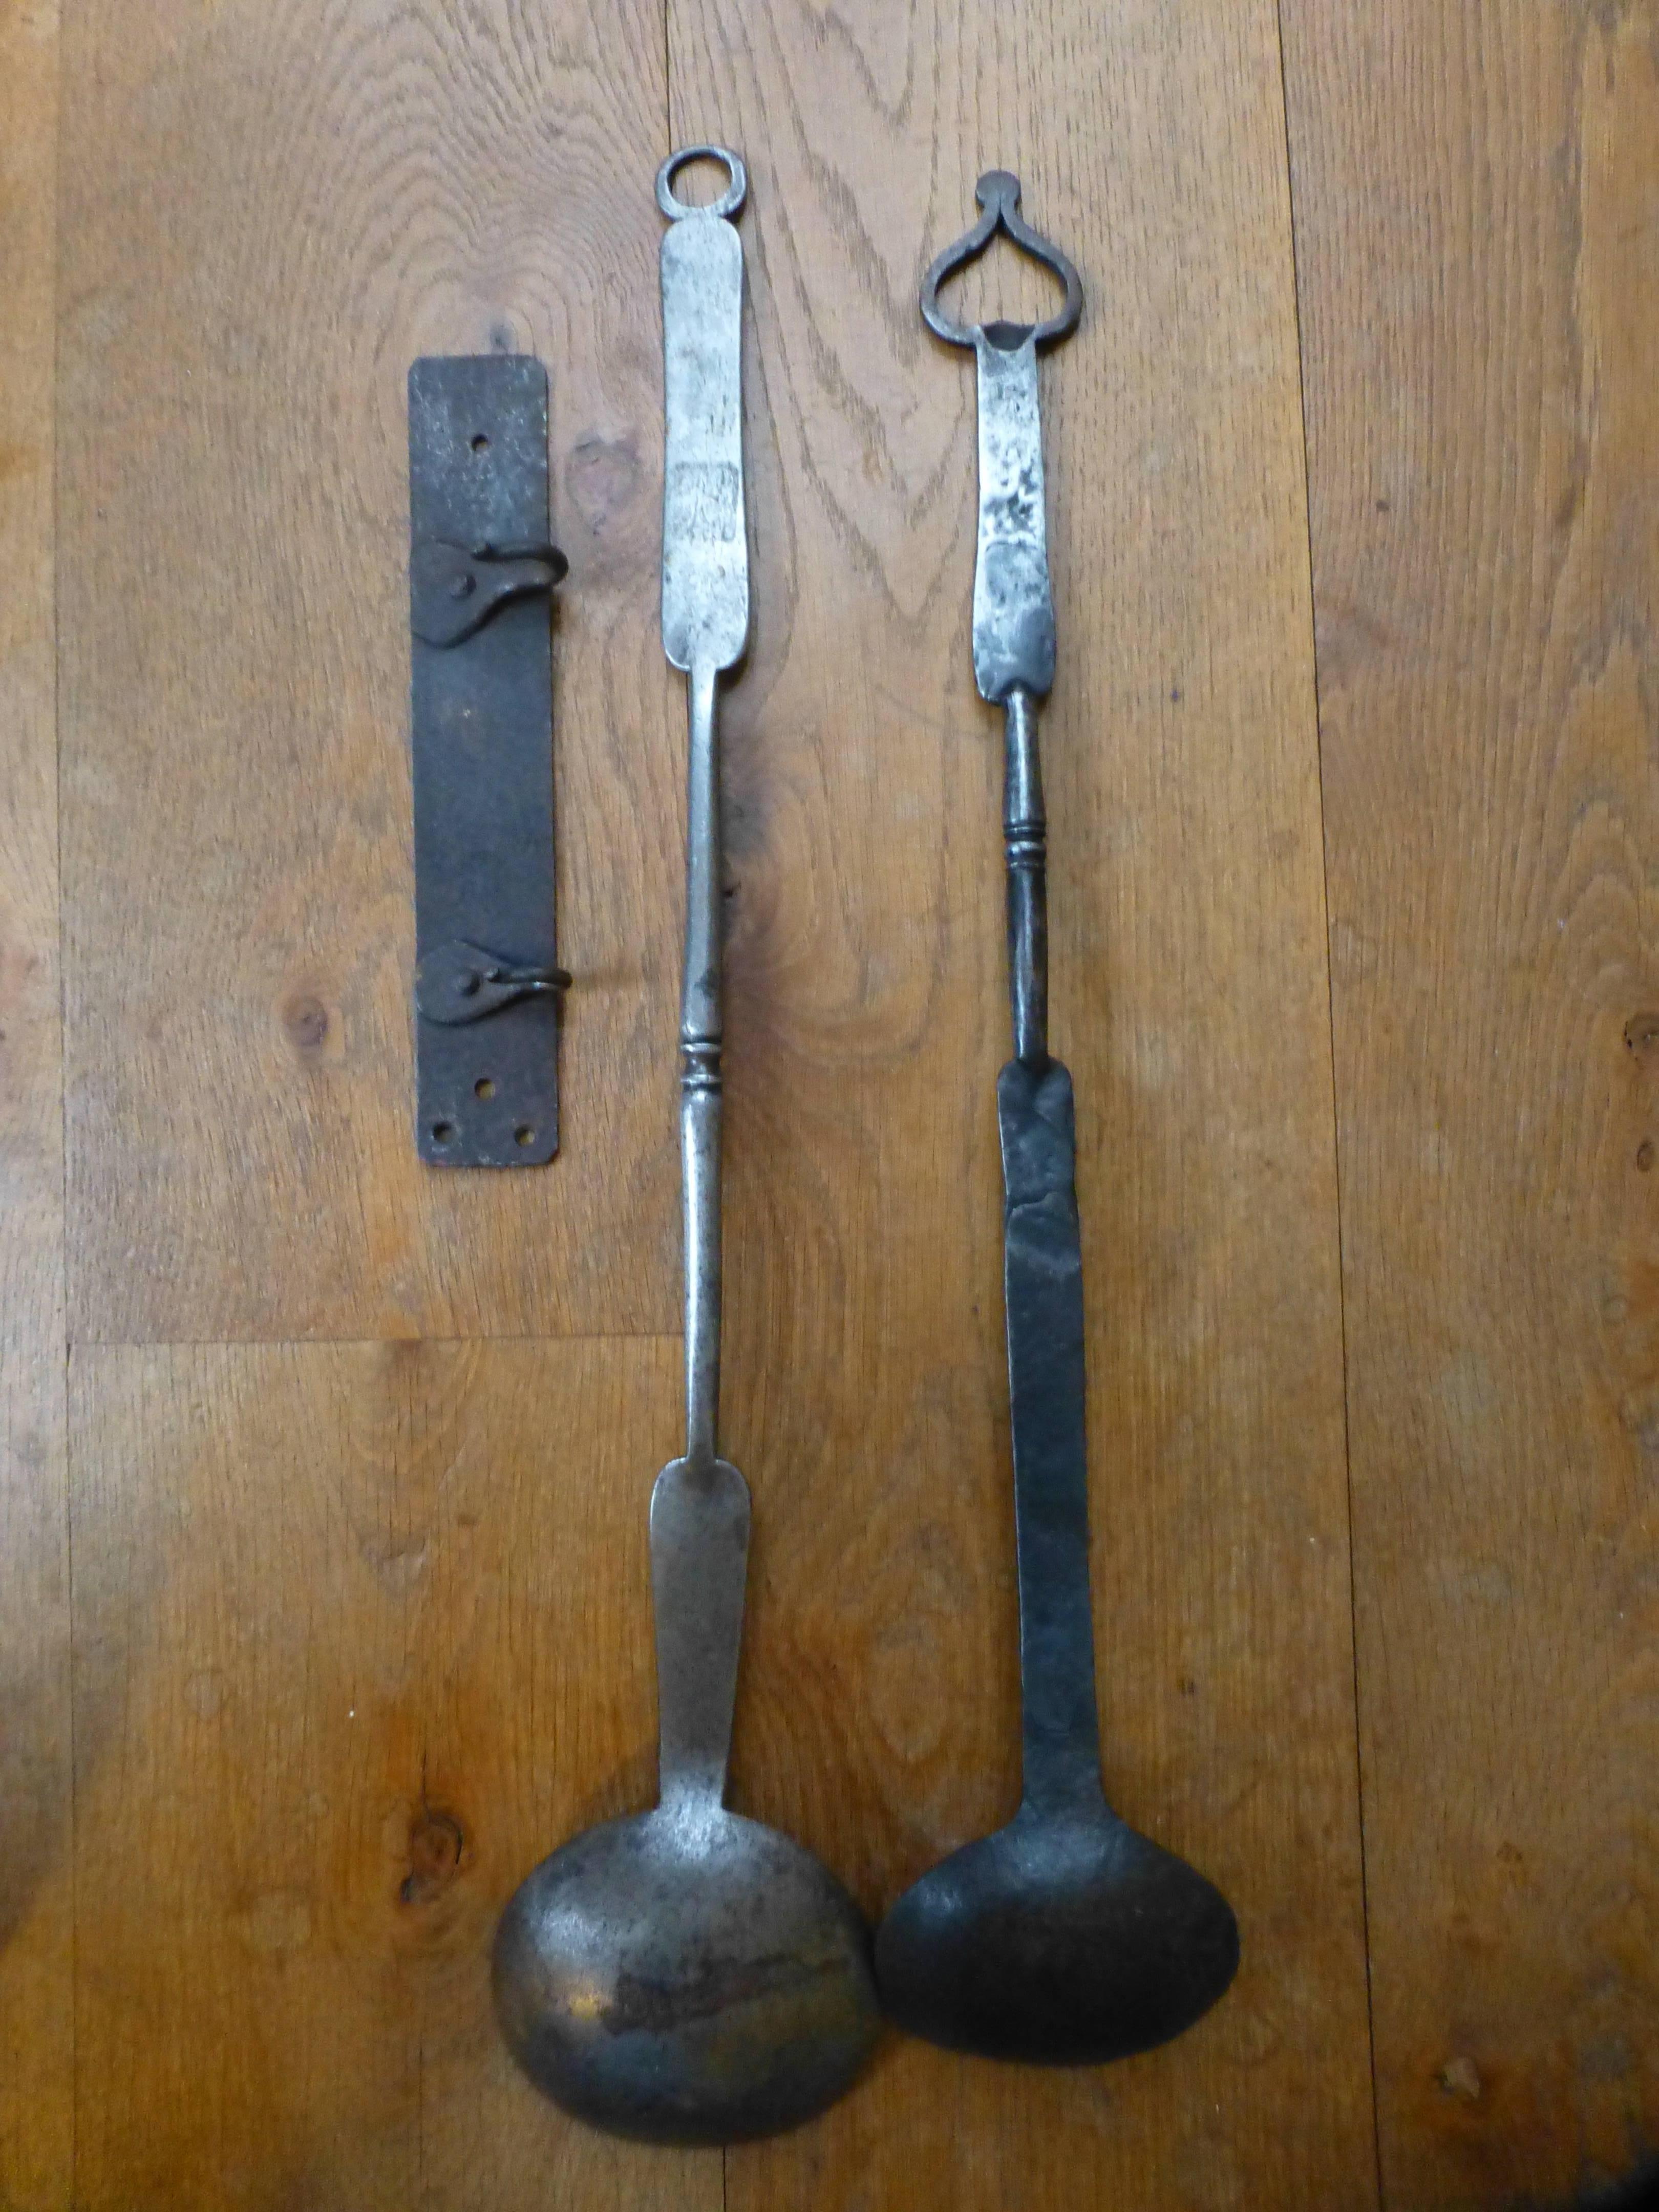 Set of 17th-18th century Dutch fireplace tools used for tasting food that is cooked in an open fire. The hanger and tools are made of wrought iron.

We have a unique and specialized collection of antique and used fireplace accessories consisting of